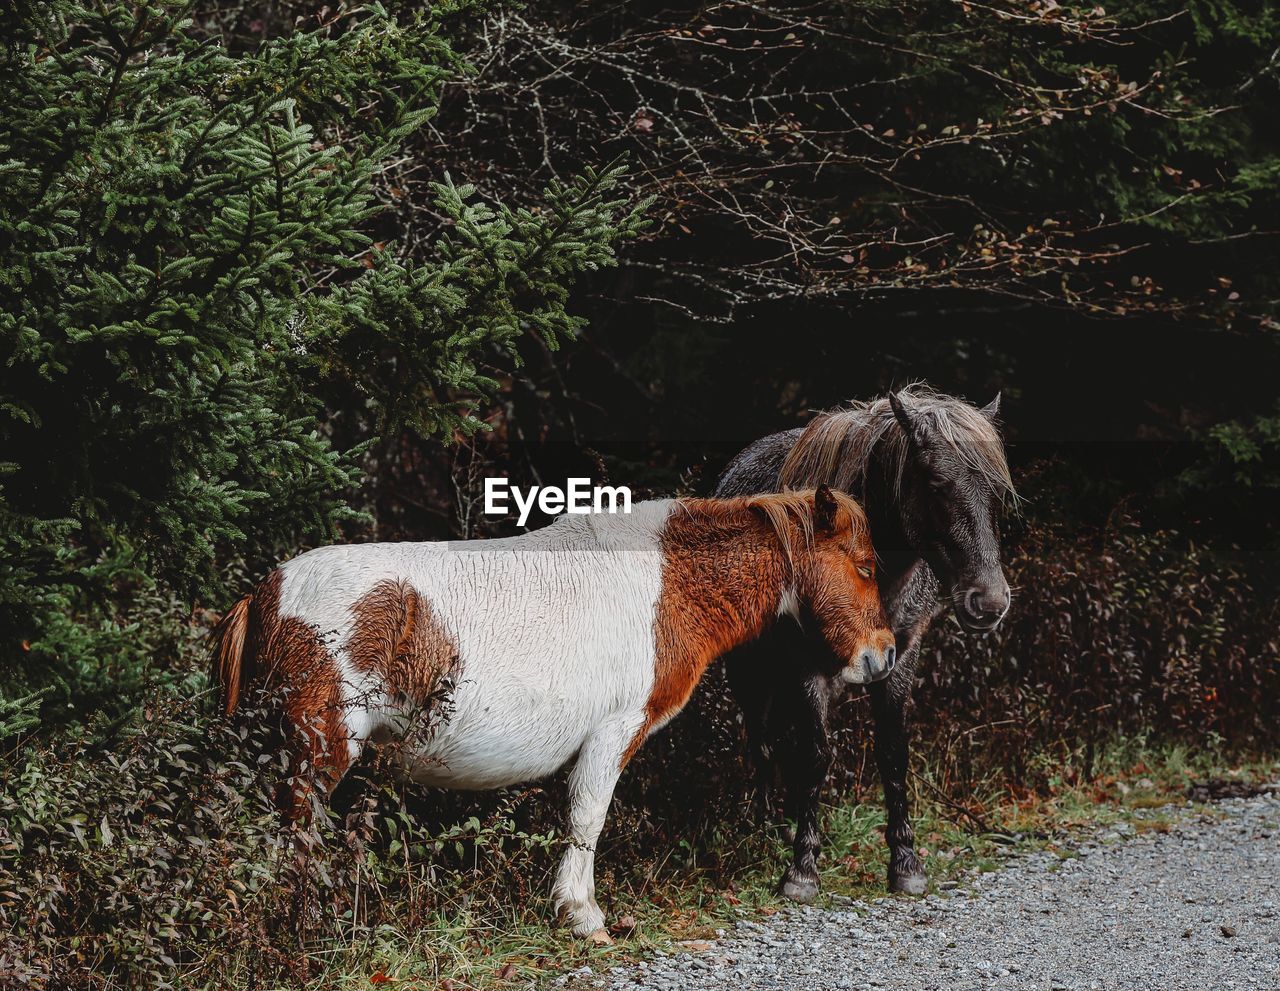 View of horses in the wild